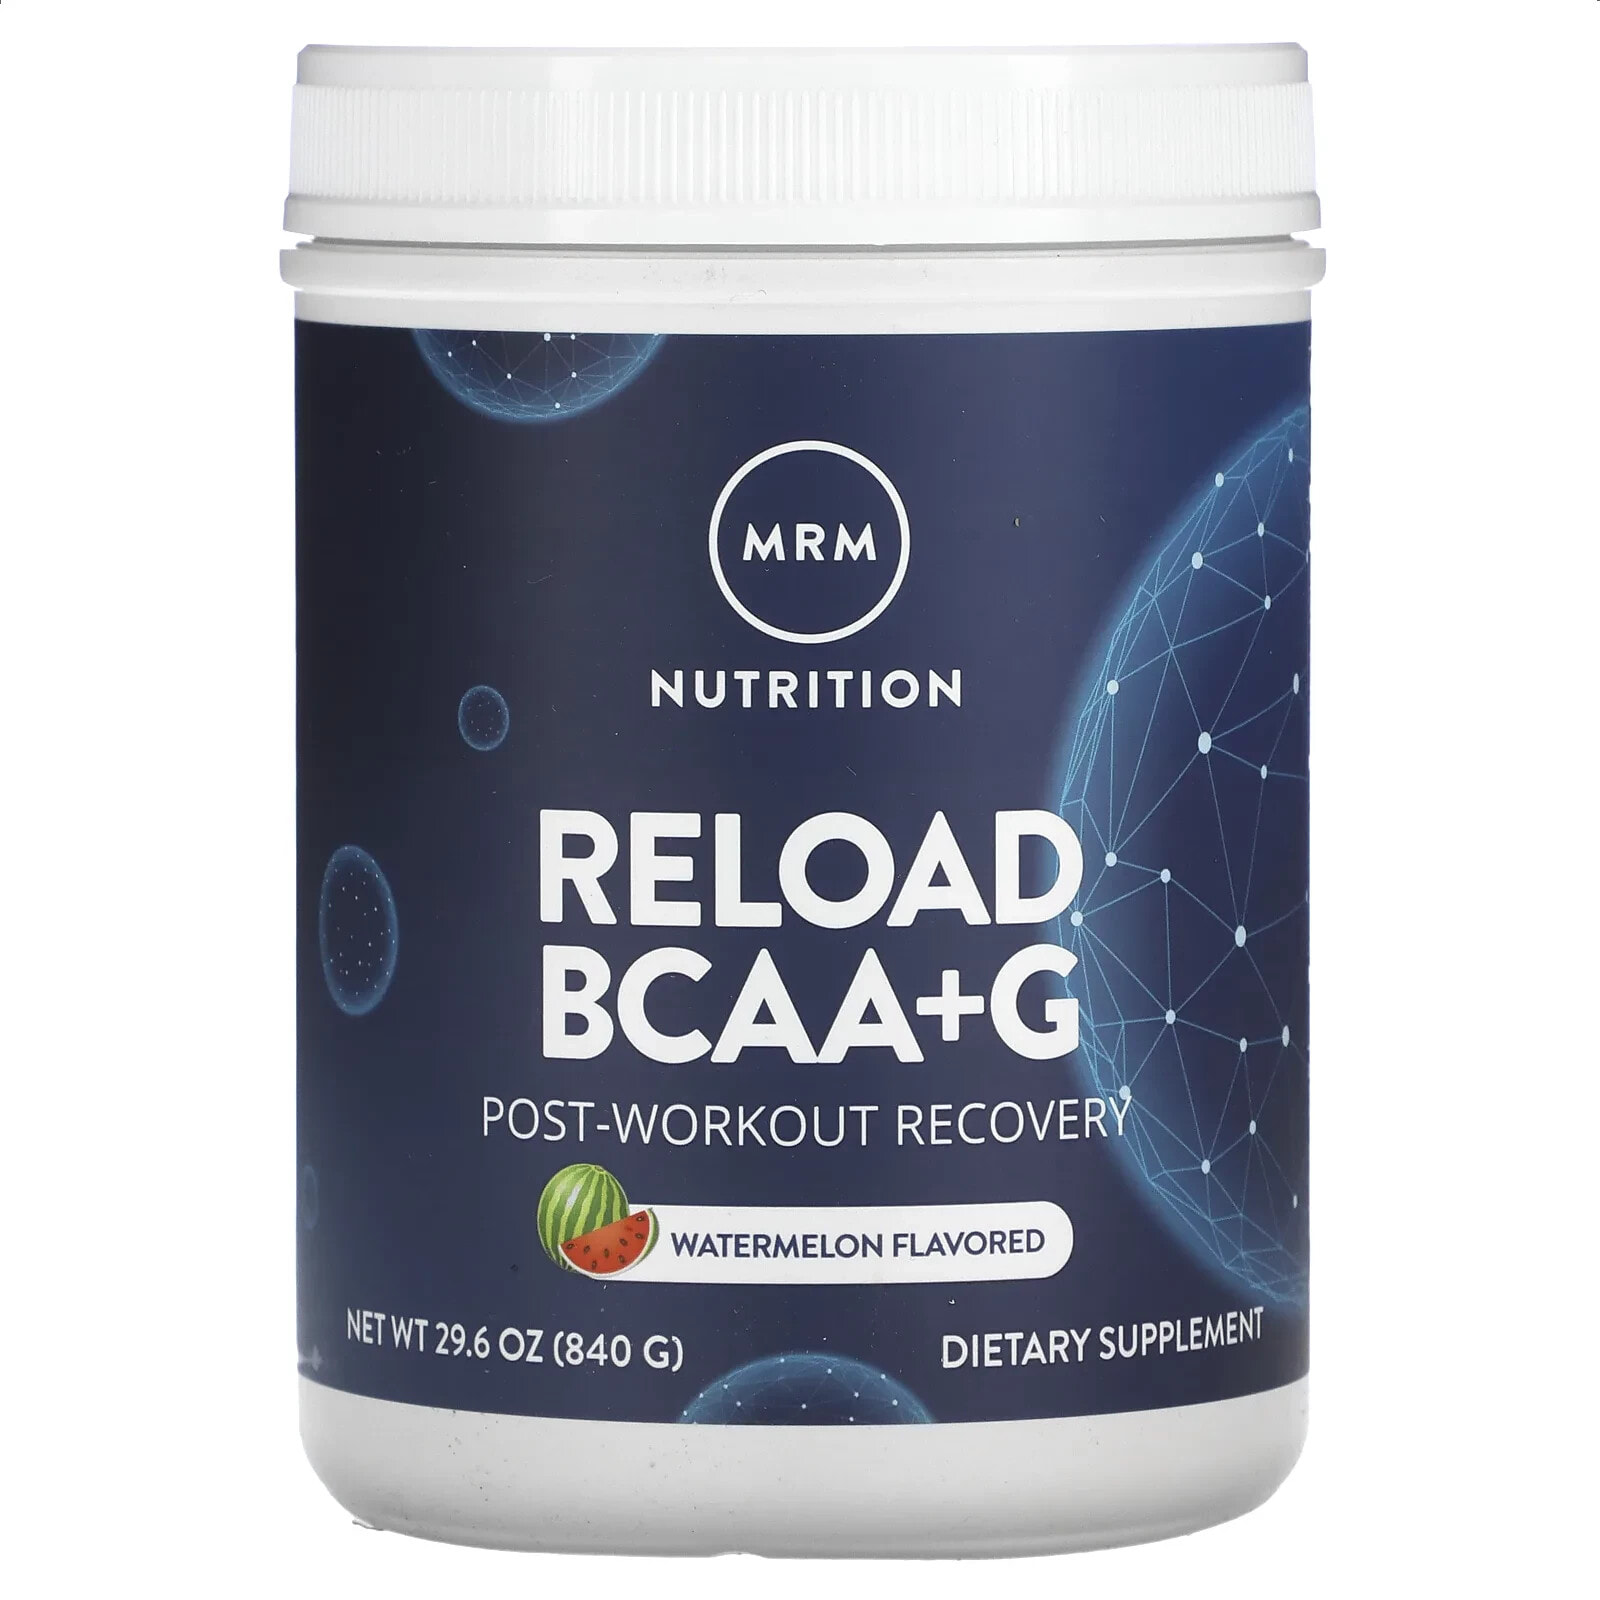 MRM Nutrition, Reload BCAA+G , Post-Workout Recovery, Lemonade, 29.6 oz (840 g)